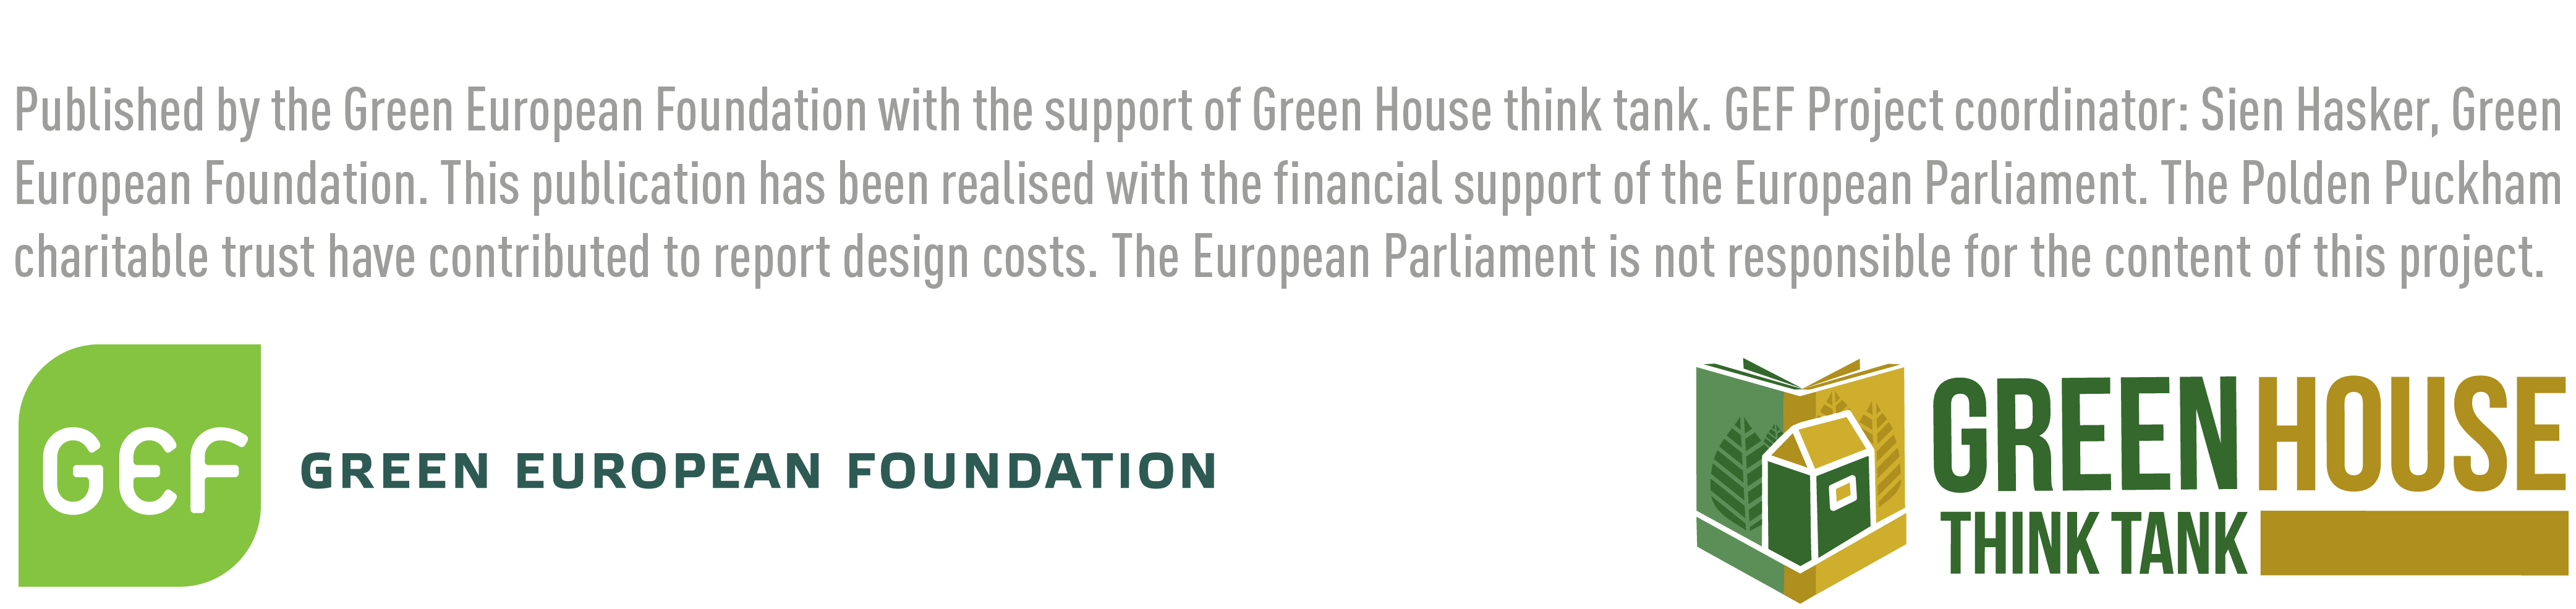 Image of the logos of the Green European Foundation and Green House Think Tank with test which reads 'Published by the Green European Foundation with the support of Green House think tank. GEF project coordinator: Sian Hasker, Green European Foundation. This publication has been realised with financial support of the European parliament. The Polden Puckham charitable trust have contributed to the report design costs. The European Parliament is not responsible for the content of this project'